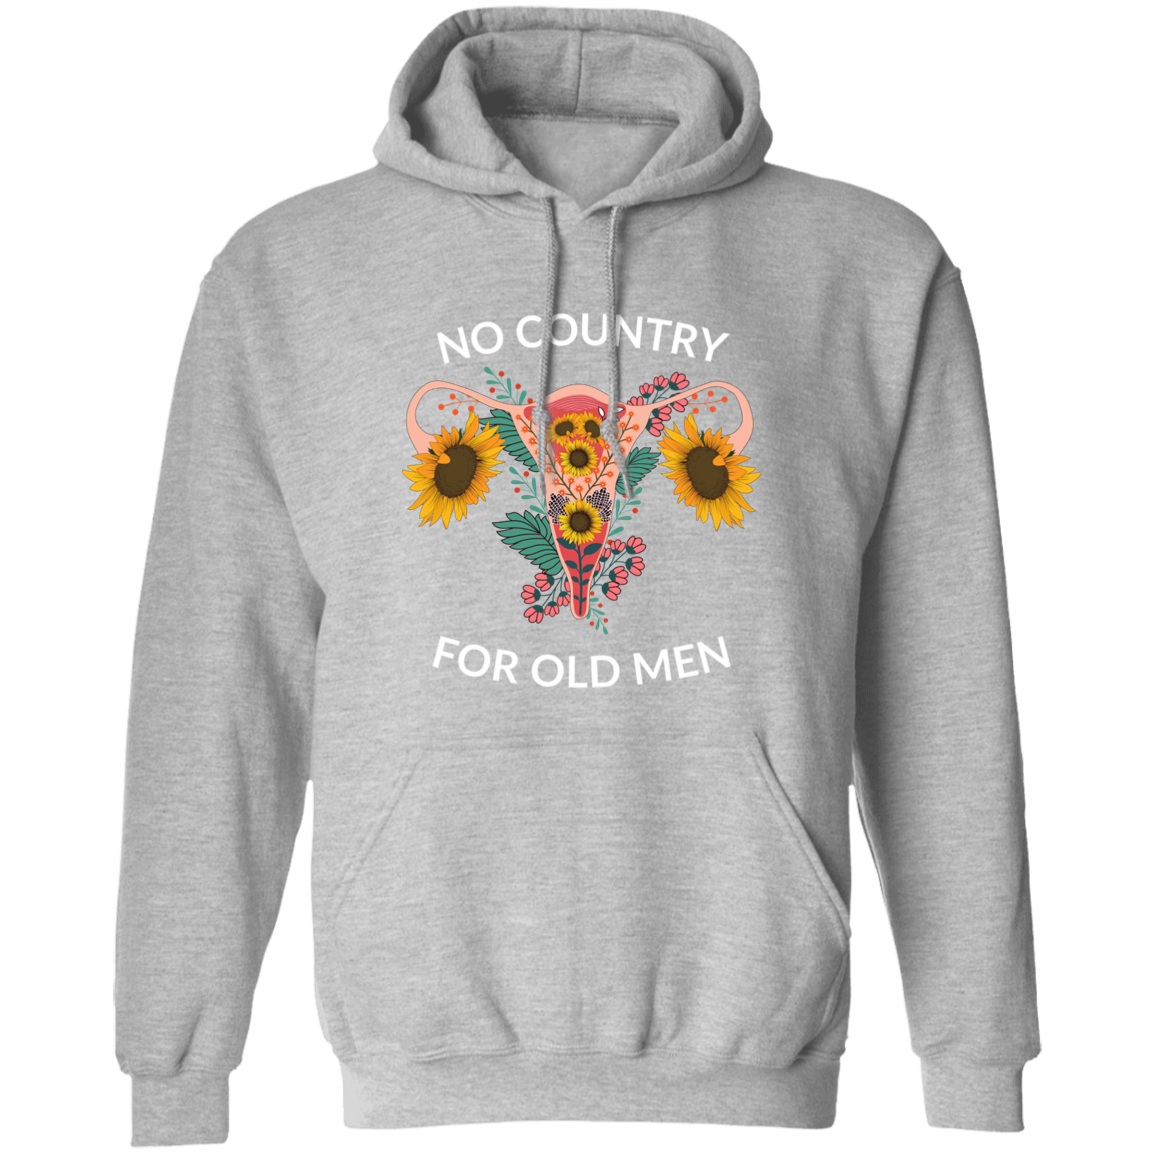 No Country For Old Men (Sunflower) Pullover Hoodie - Unisex